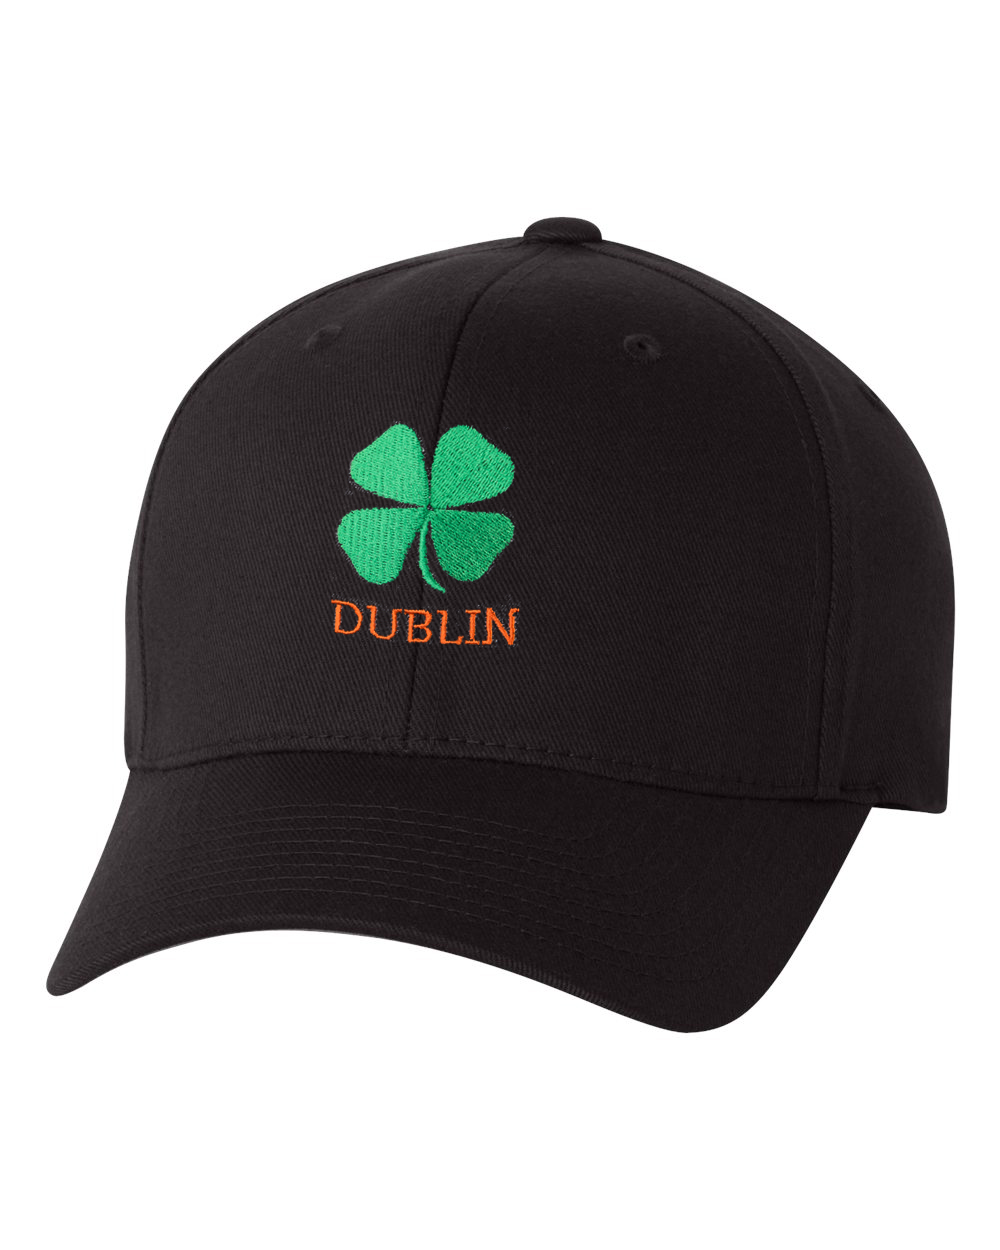 St Patrick's Day Fitted Hat, Four Leaf Clover Flex Fit Baseball Hat - Clover & Dublin - image 1 of 3